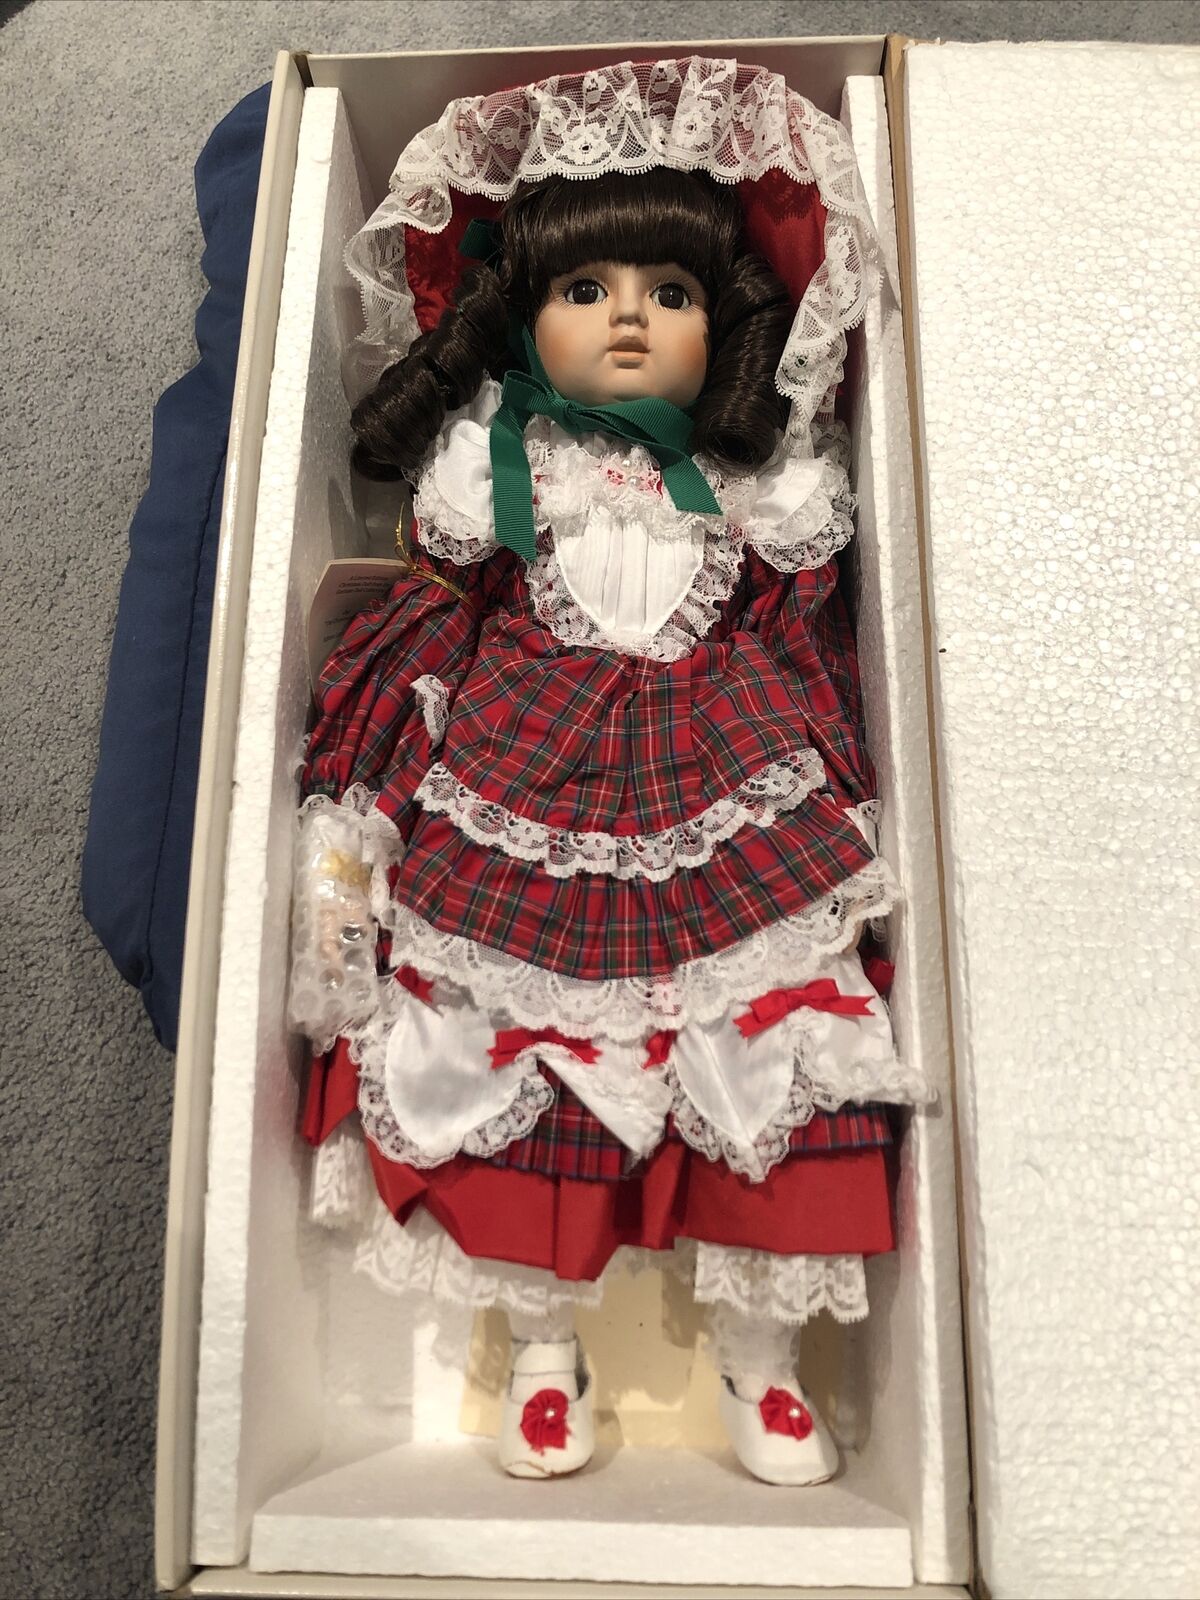 The Gorham Doll Collection Joy The Christmas Song 1985 Le 19" Porcelain Doll New